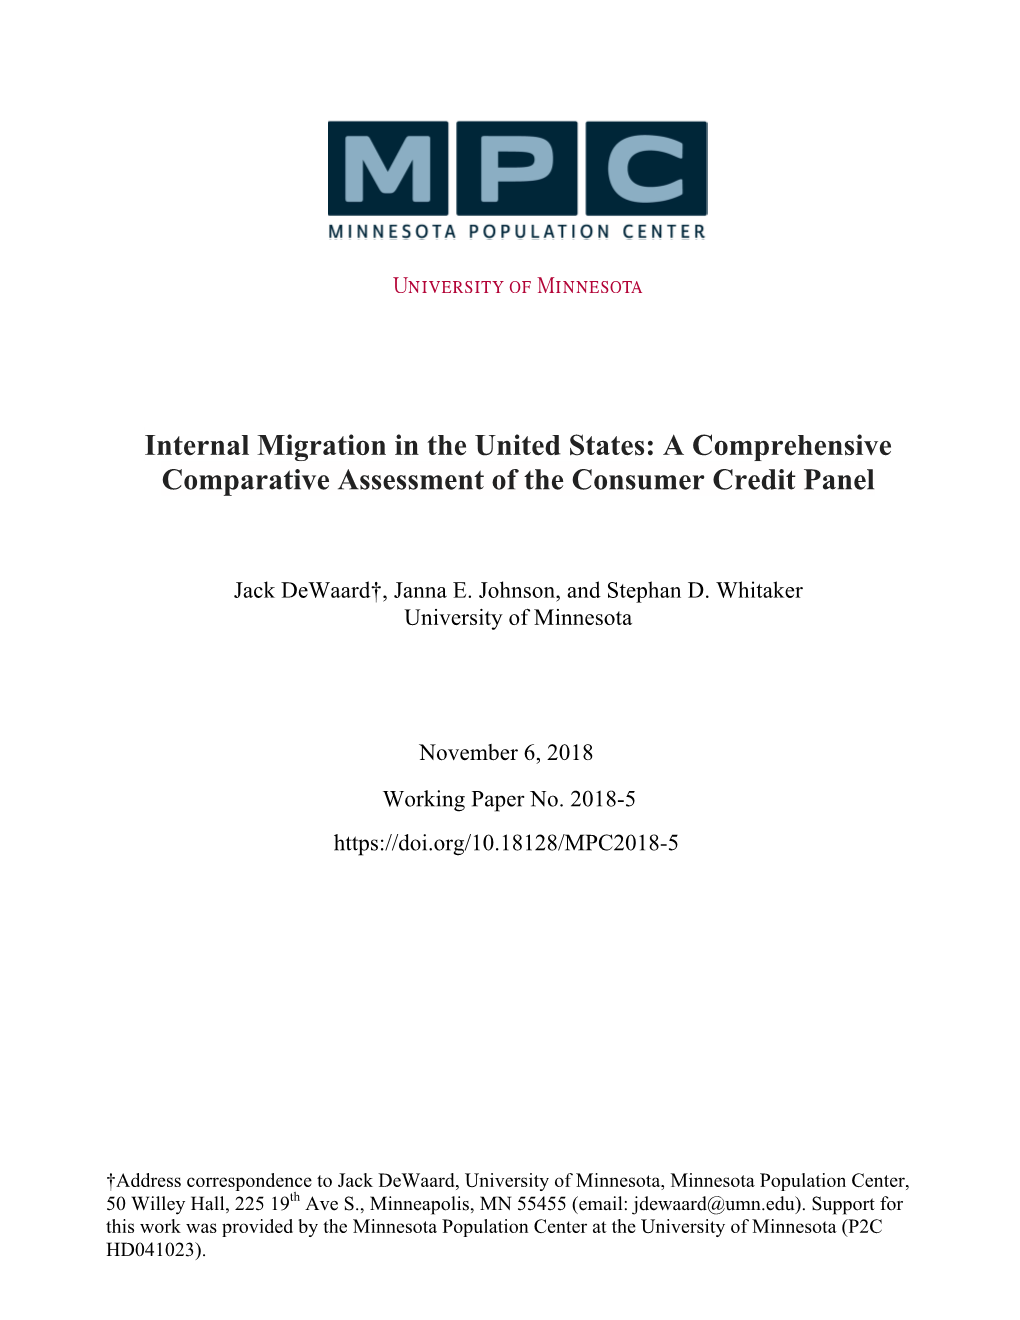 Internal Migration in the United States: a Comprehensive Comparative Assessment of the Consumer Credit Panel